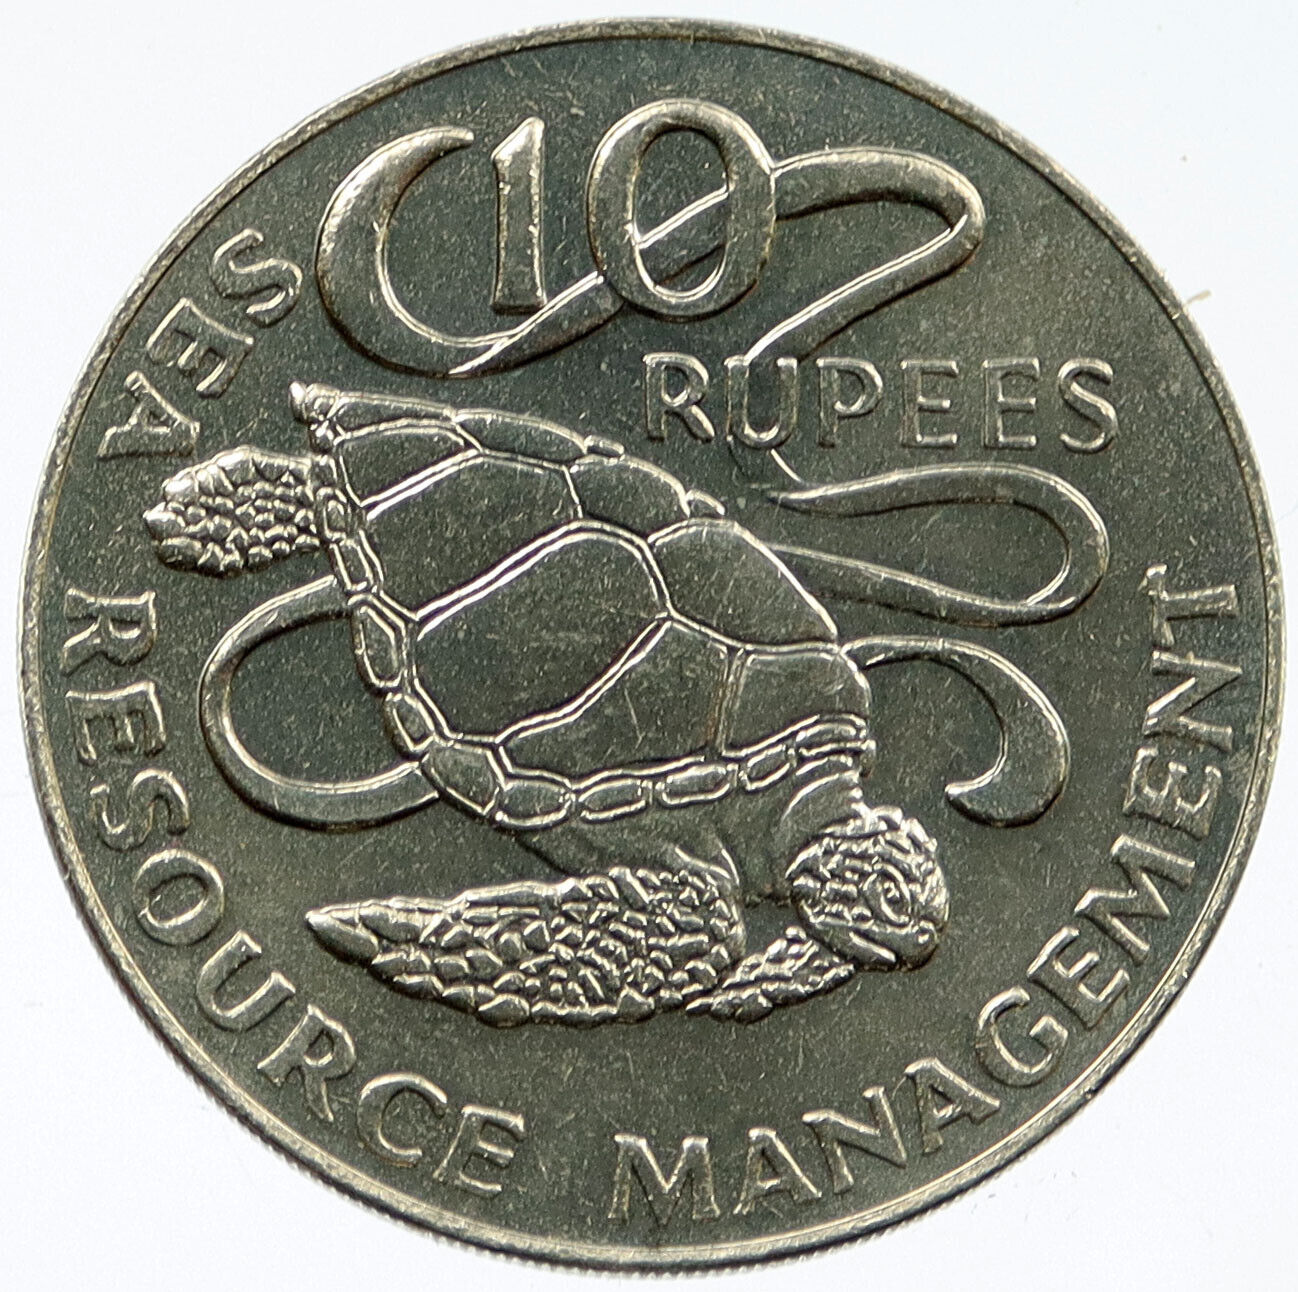 1977 SEYCHELLES F.A.O. Green Sea Turtle 10 Rupees Large Vintage Coin i117334